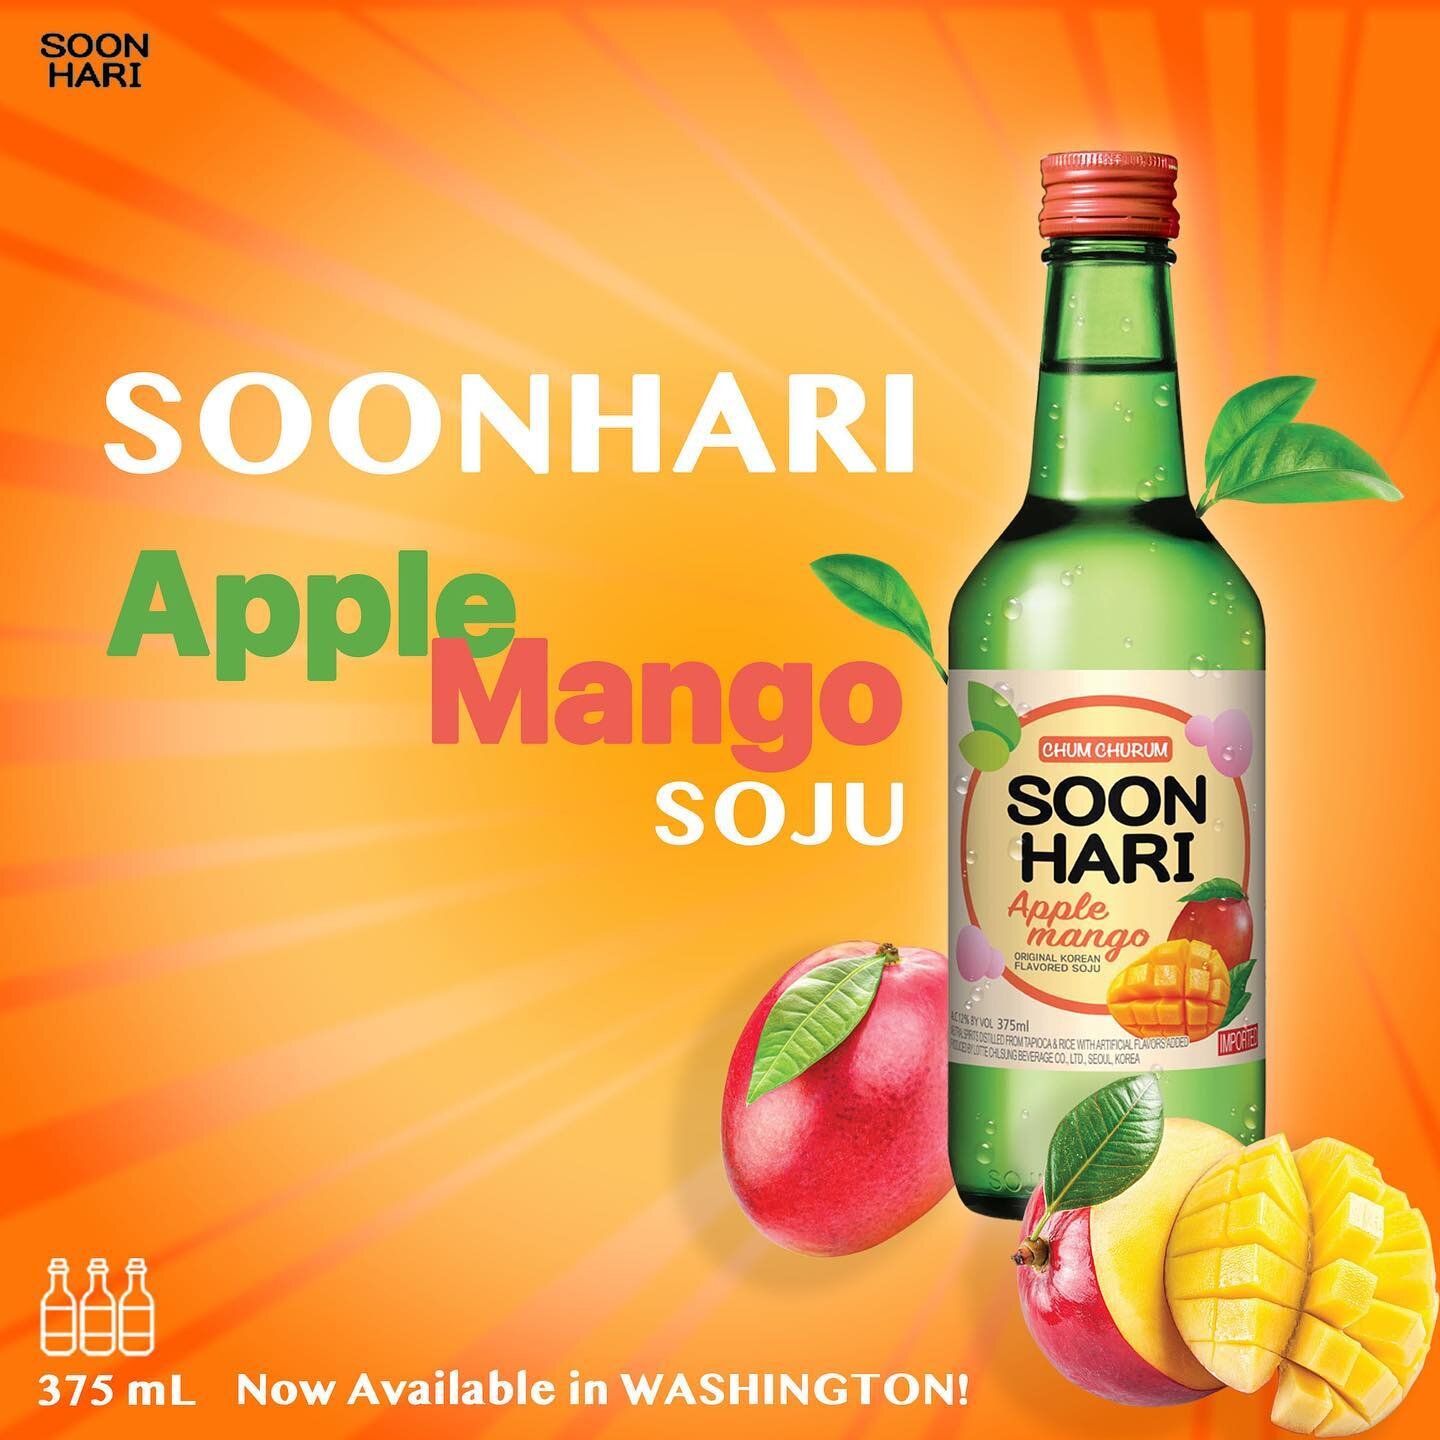 Now available: Soonhari AppleMango! 
Tired of choosing one over the other? 
Enjoy the best of both worlds, and have one less worry in the world. Please enjoy responsibly! #soonhari #applemango #soju #kpop